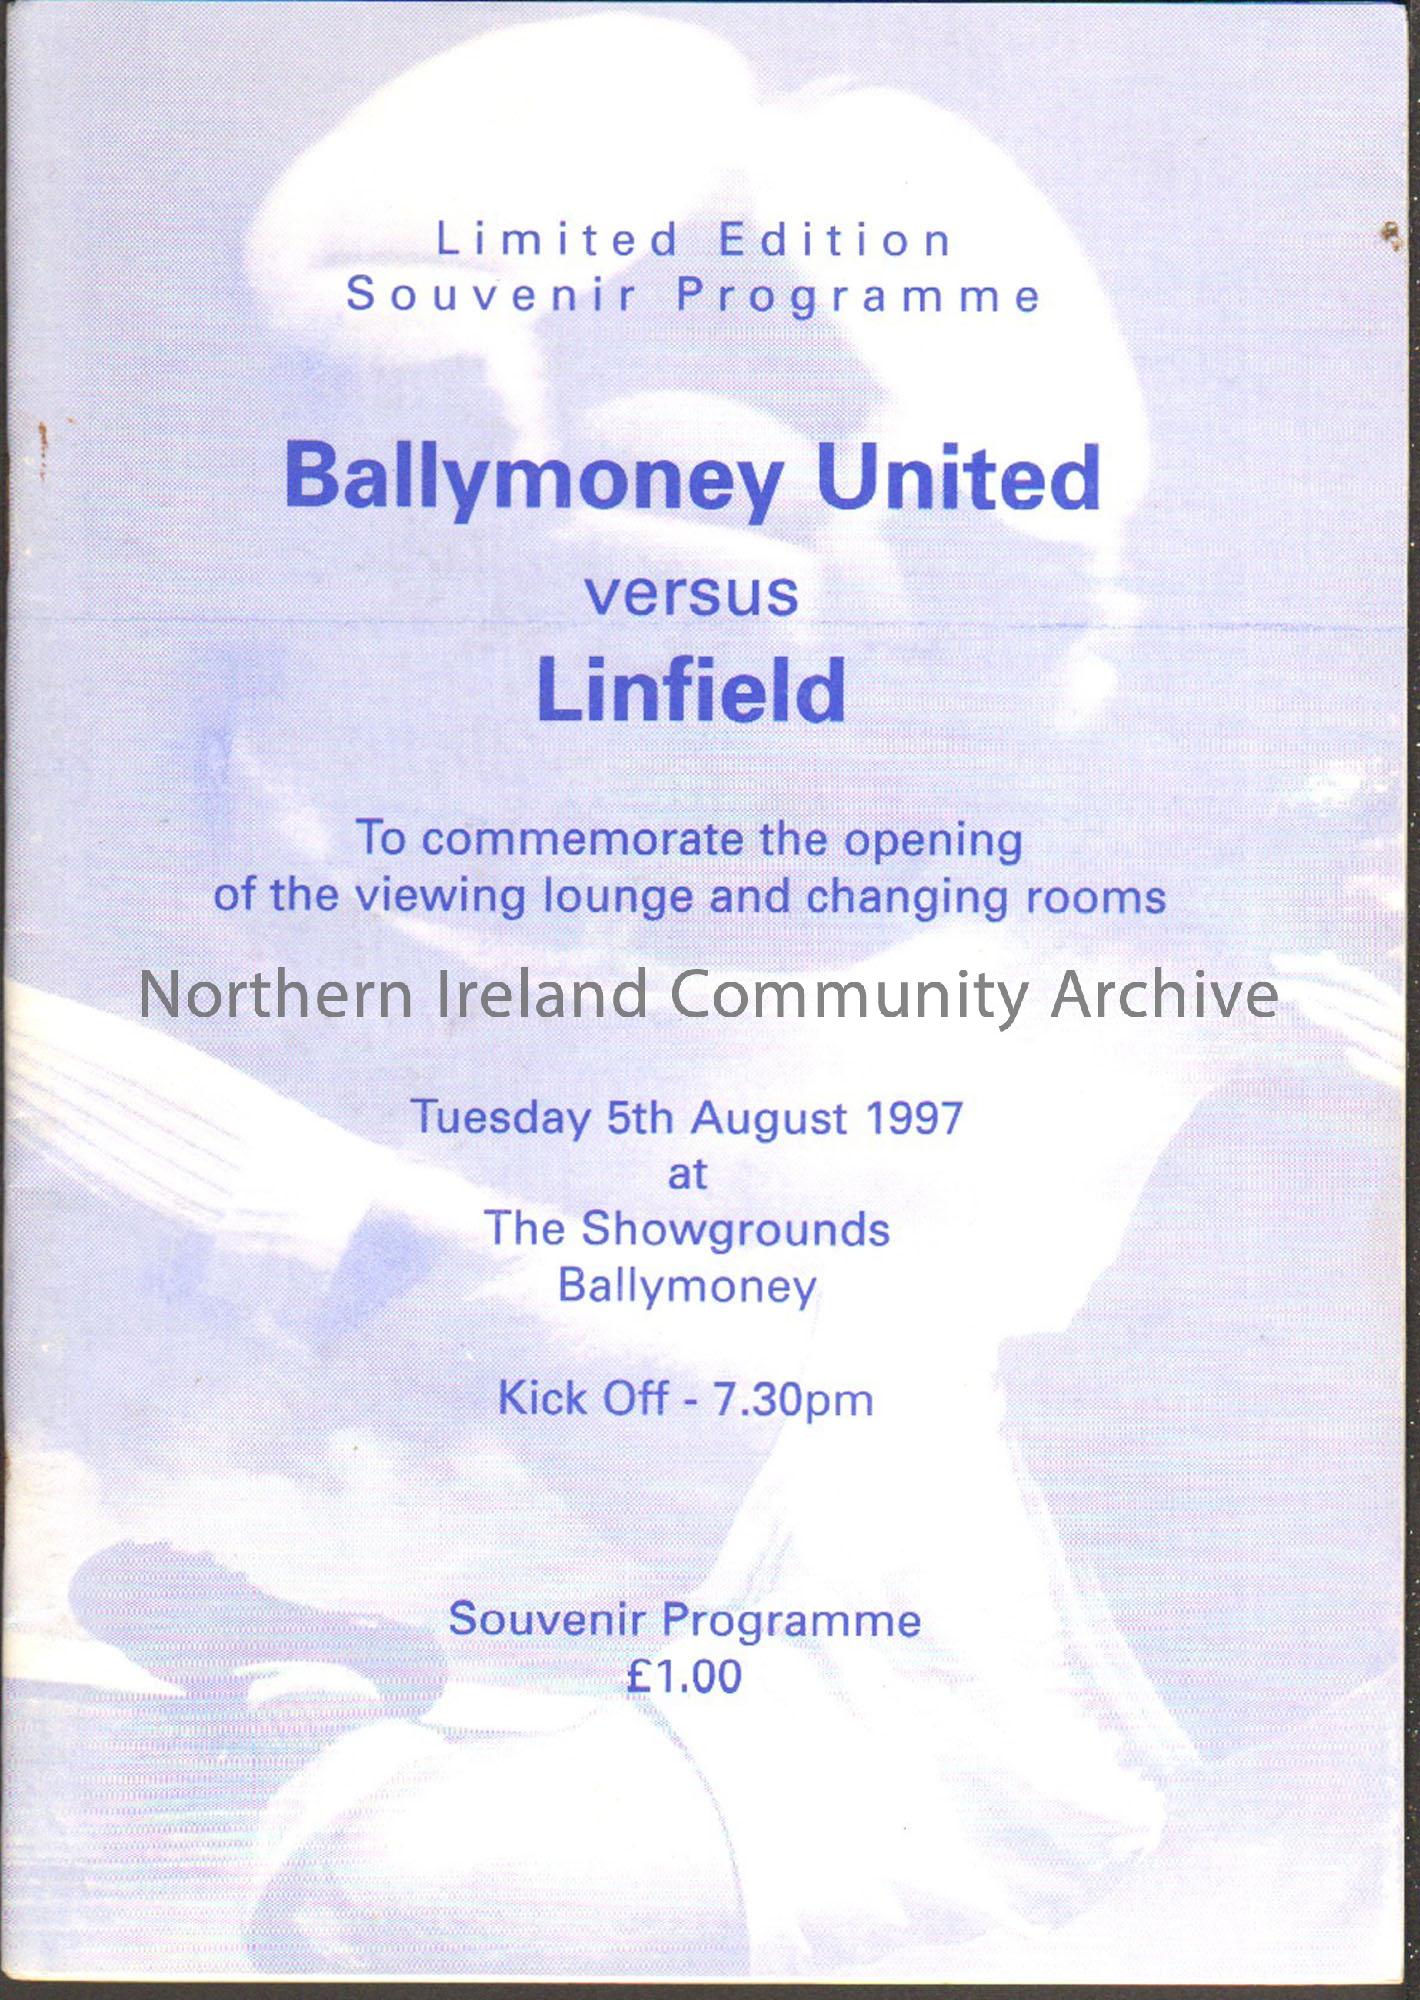 Football programme – Ballymoney United versus Linfield. Light blue and white programme with image of a football and player sliding in the background o…